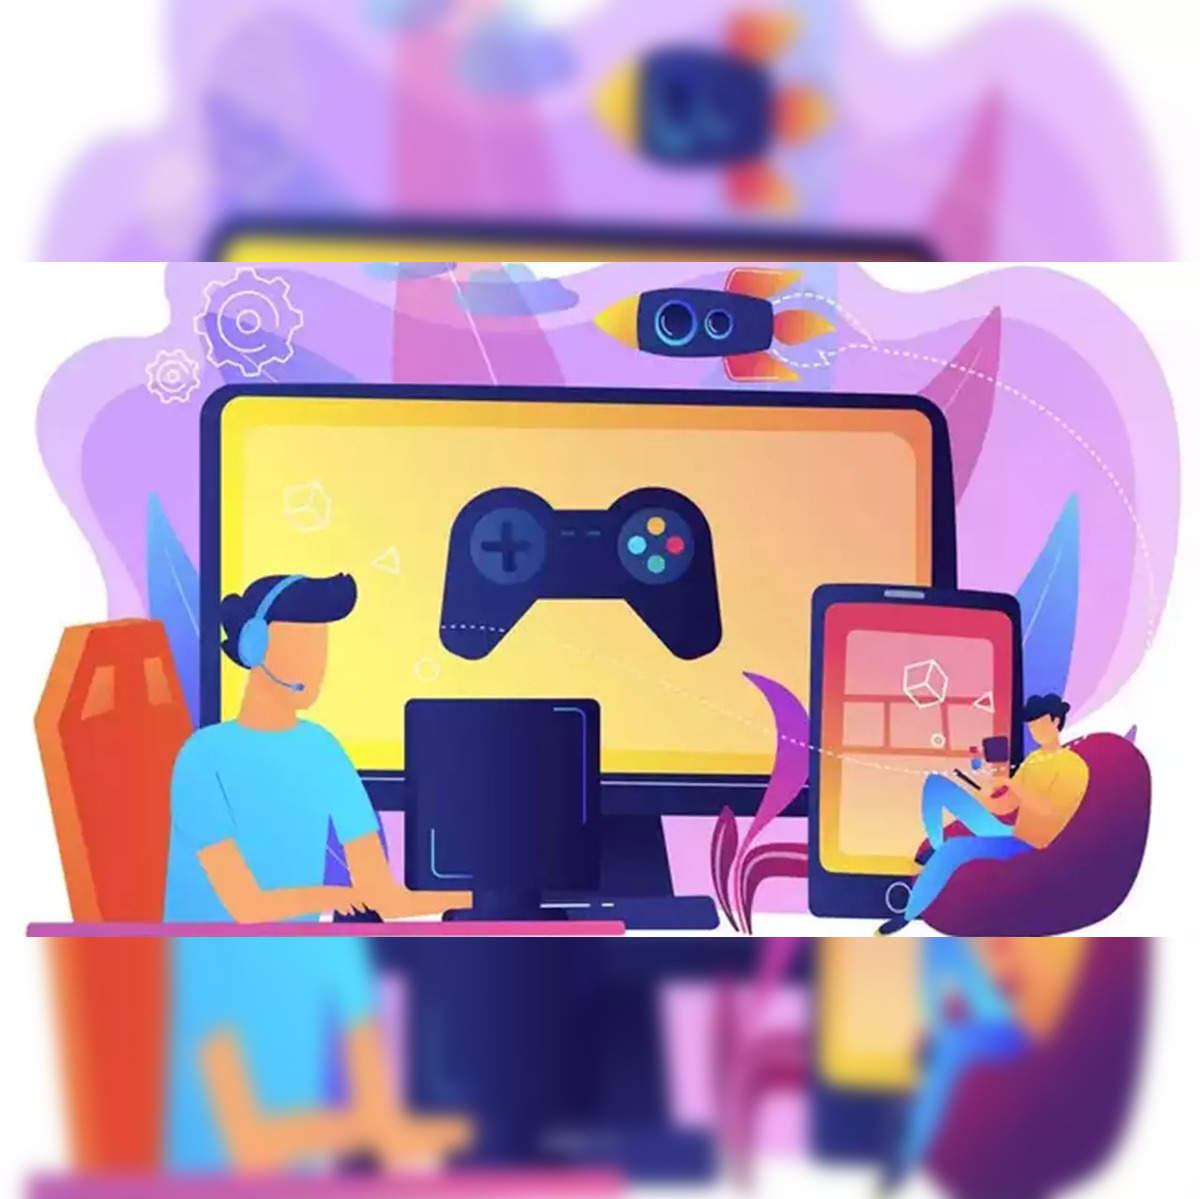 gaming: VC firm Lumikai cuts growth projection for India's real-money gaming  segment - The Economic Times